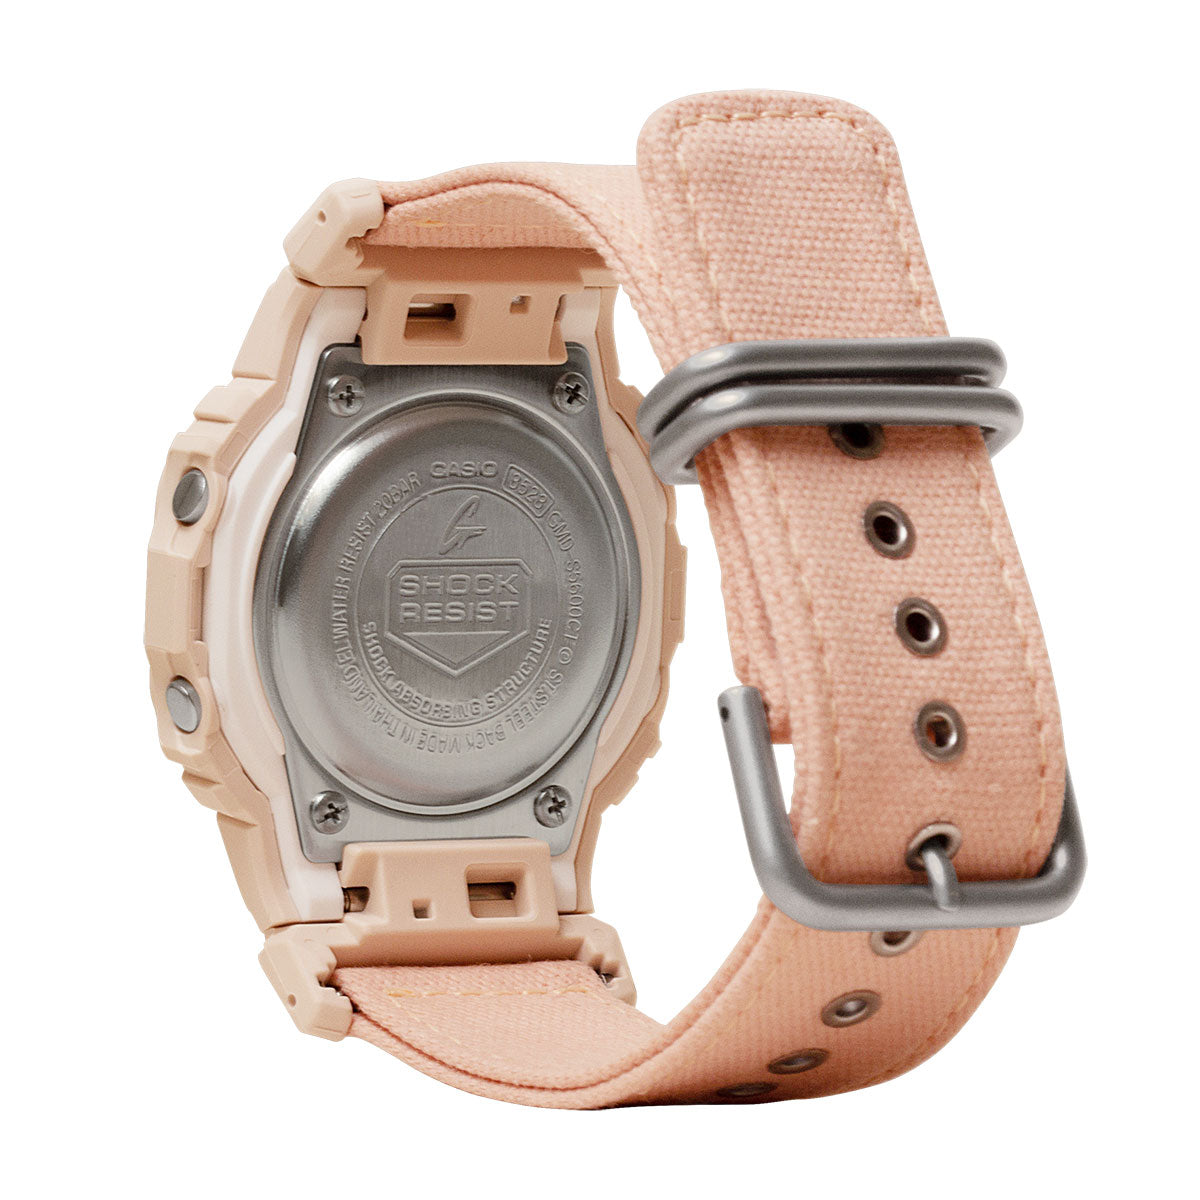 G-Shock GMDS5600CT-4 Watch - Resin Pink image 3